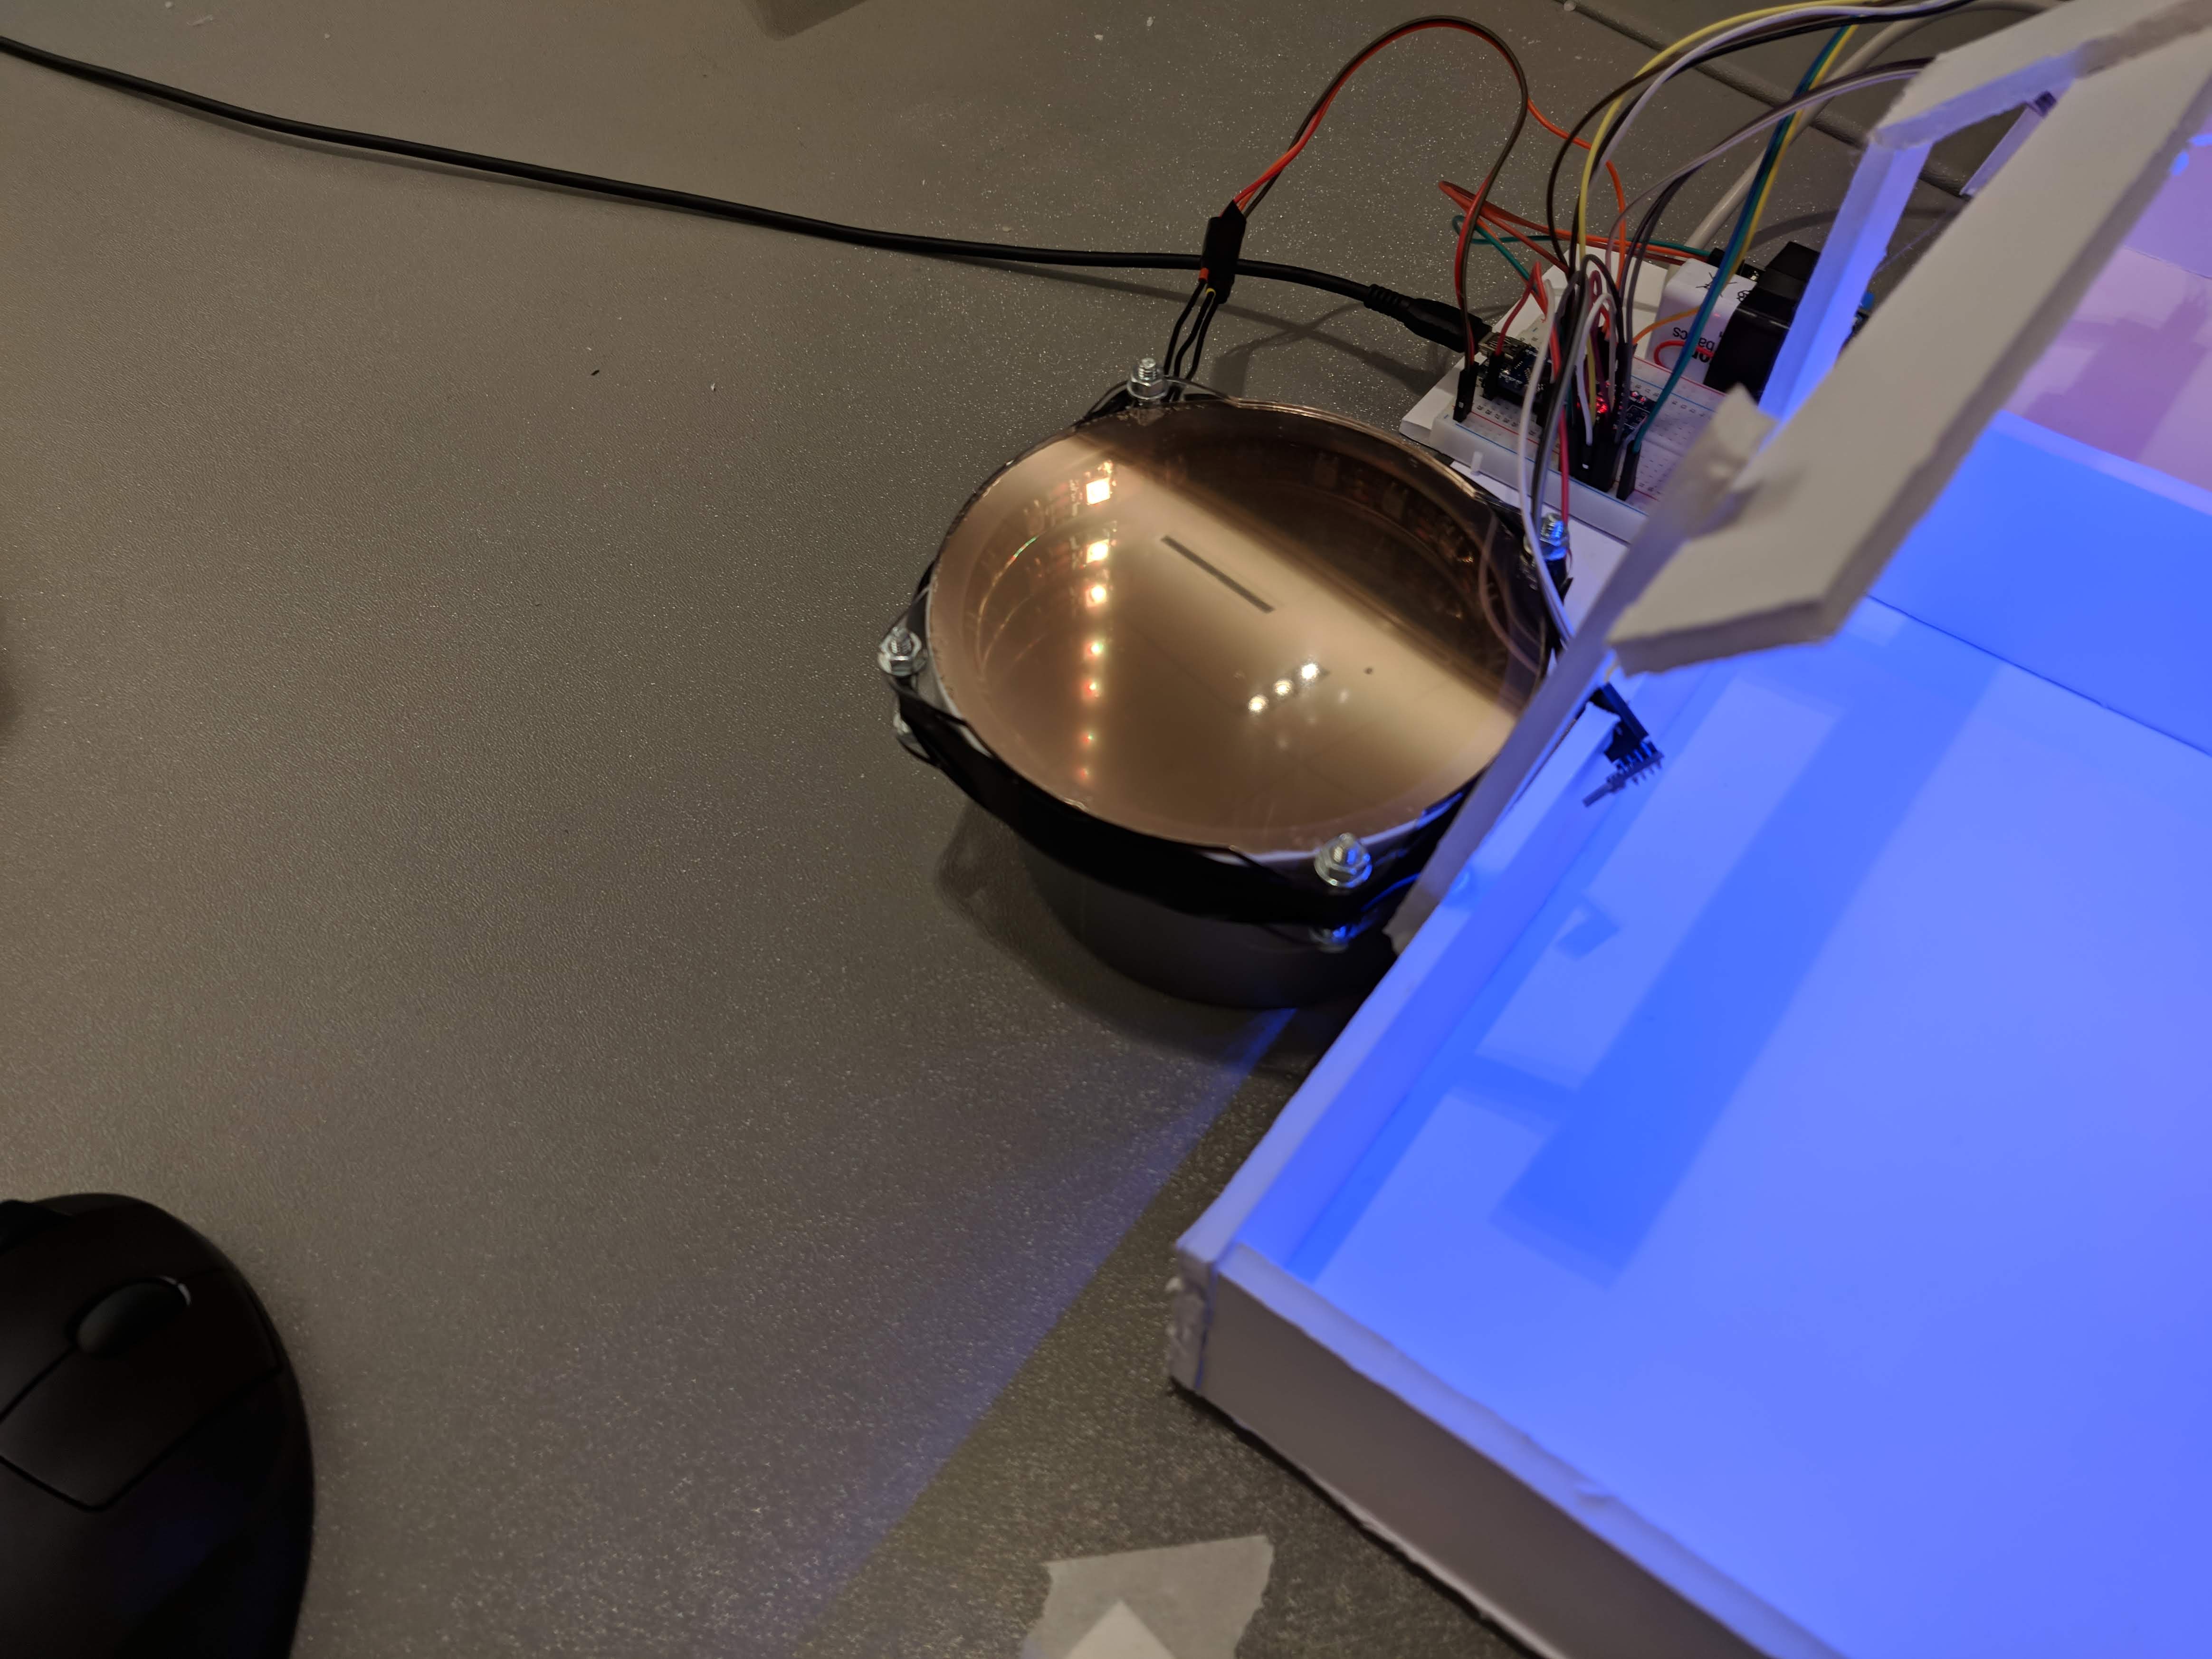 Infinity mirror showing one device connected